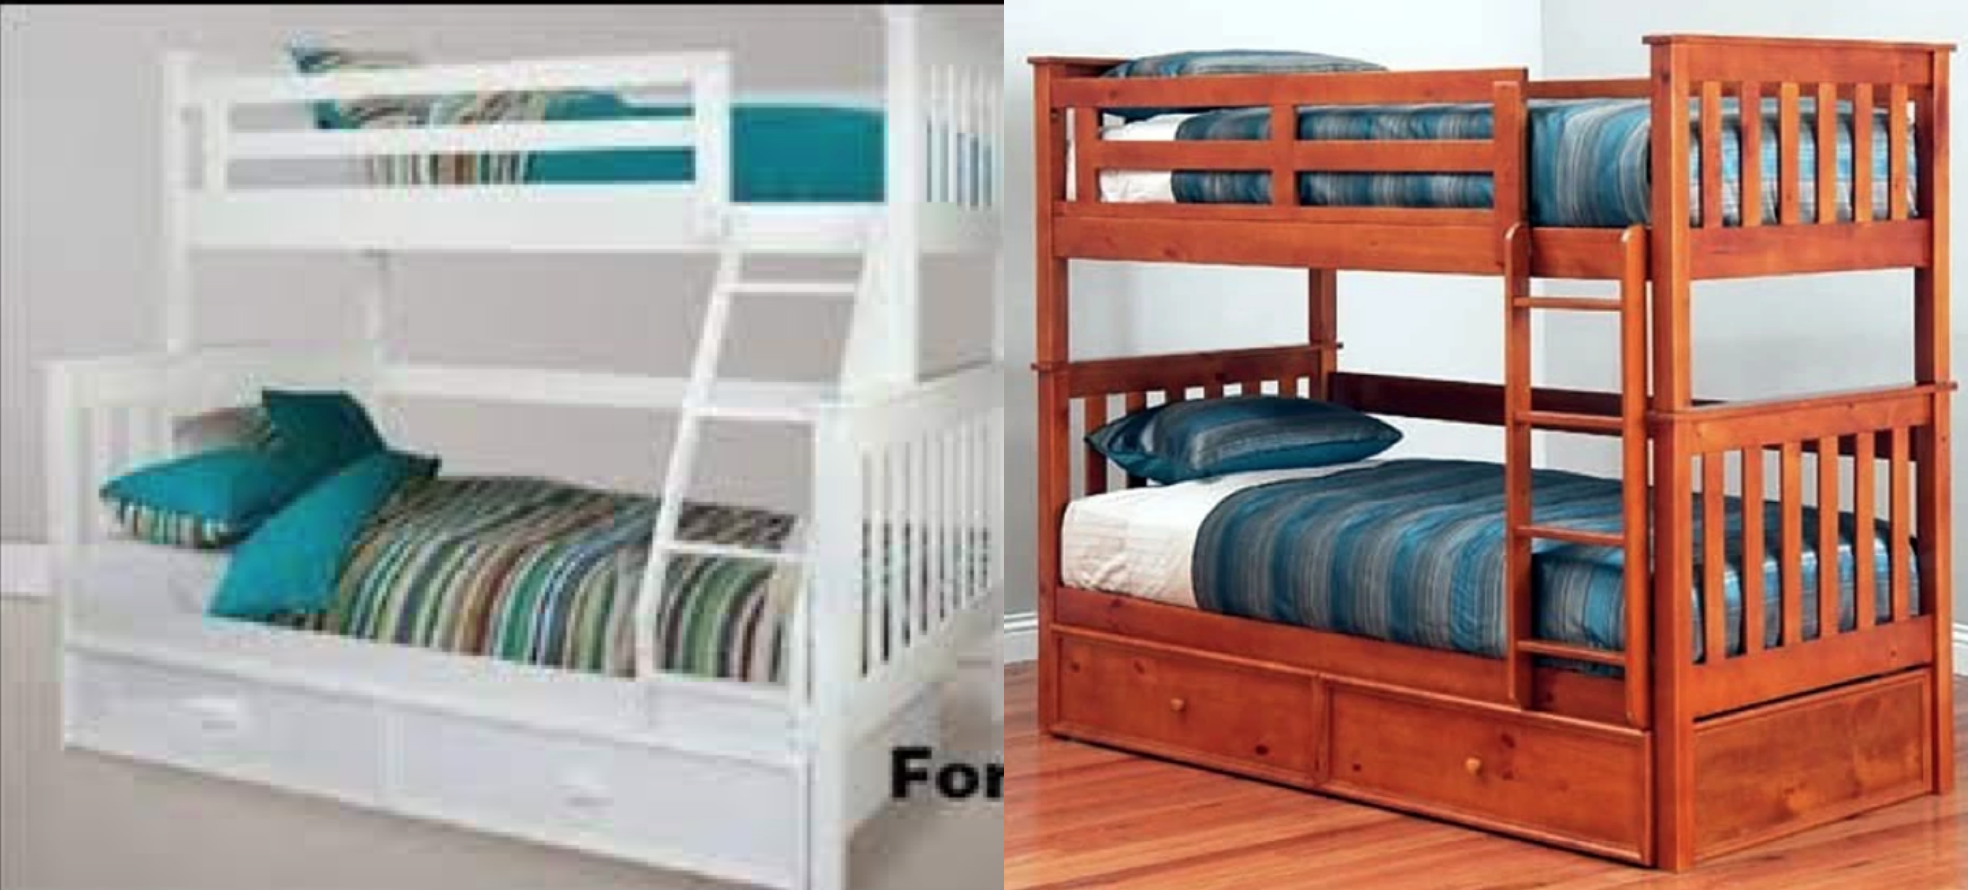 Fort Bunk Mattresses Galore, Fort Style Bunk Beds